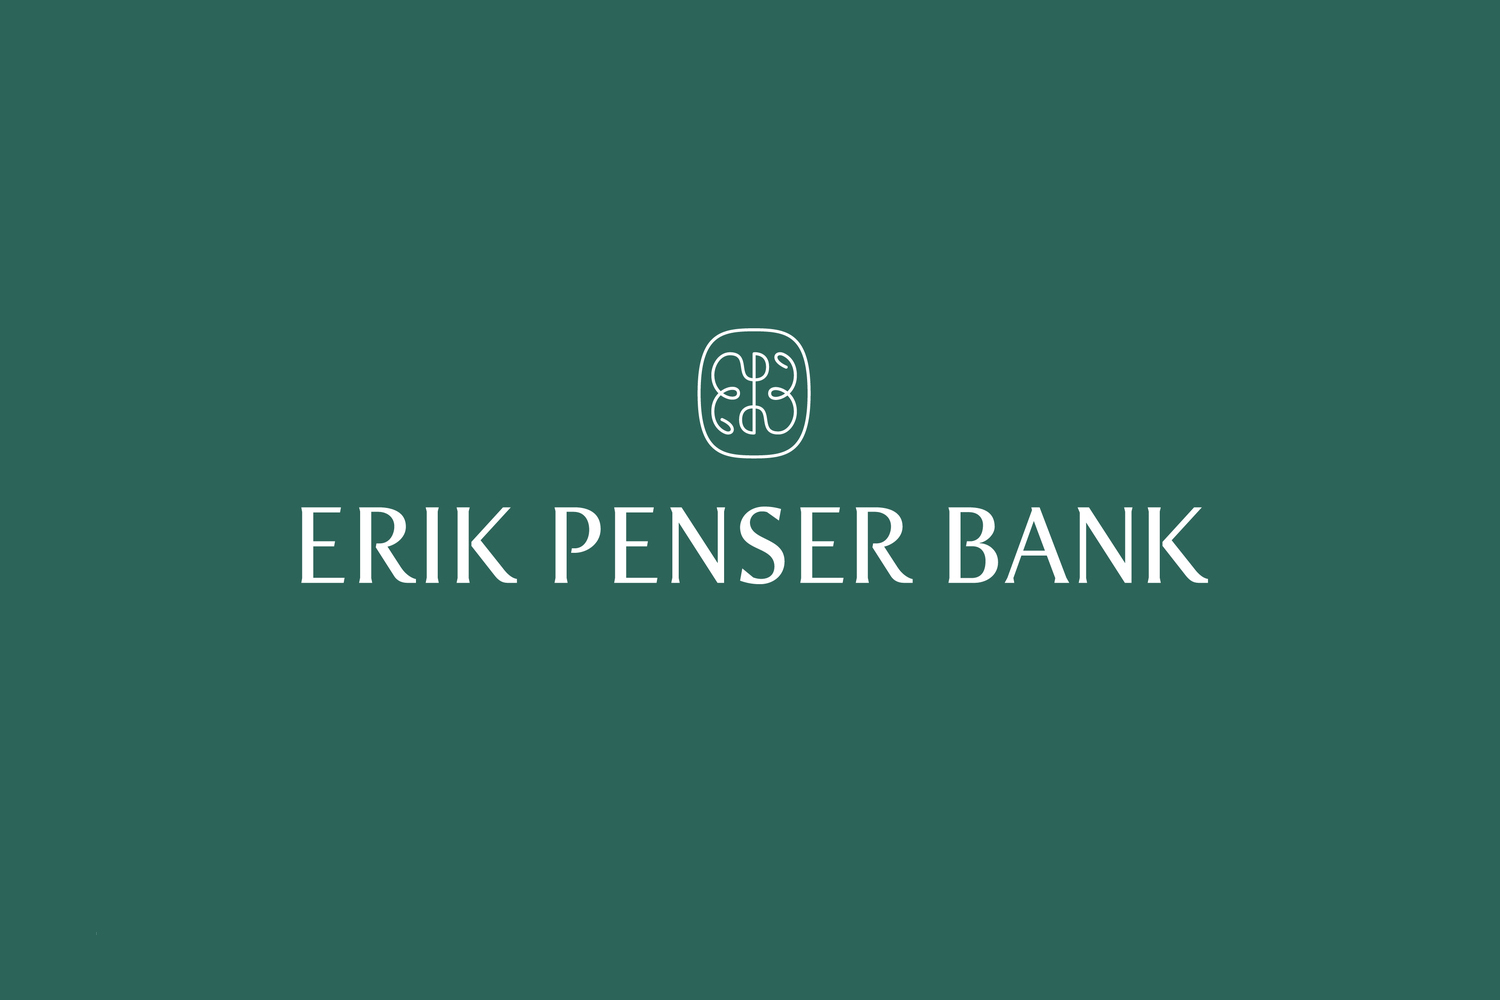 Logo and logotype for Sweden's leading private banking firm Erik Penser Bank designed by Bedow and Íñigo López Vázquez